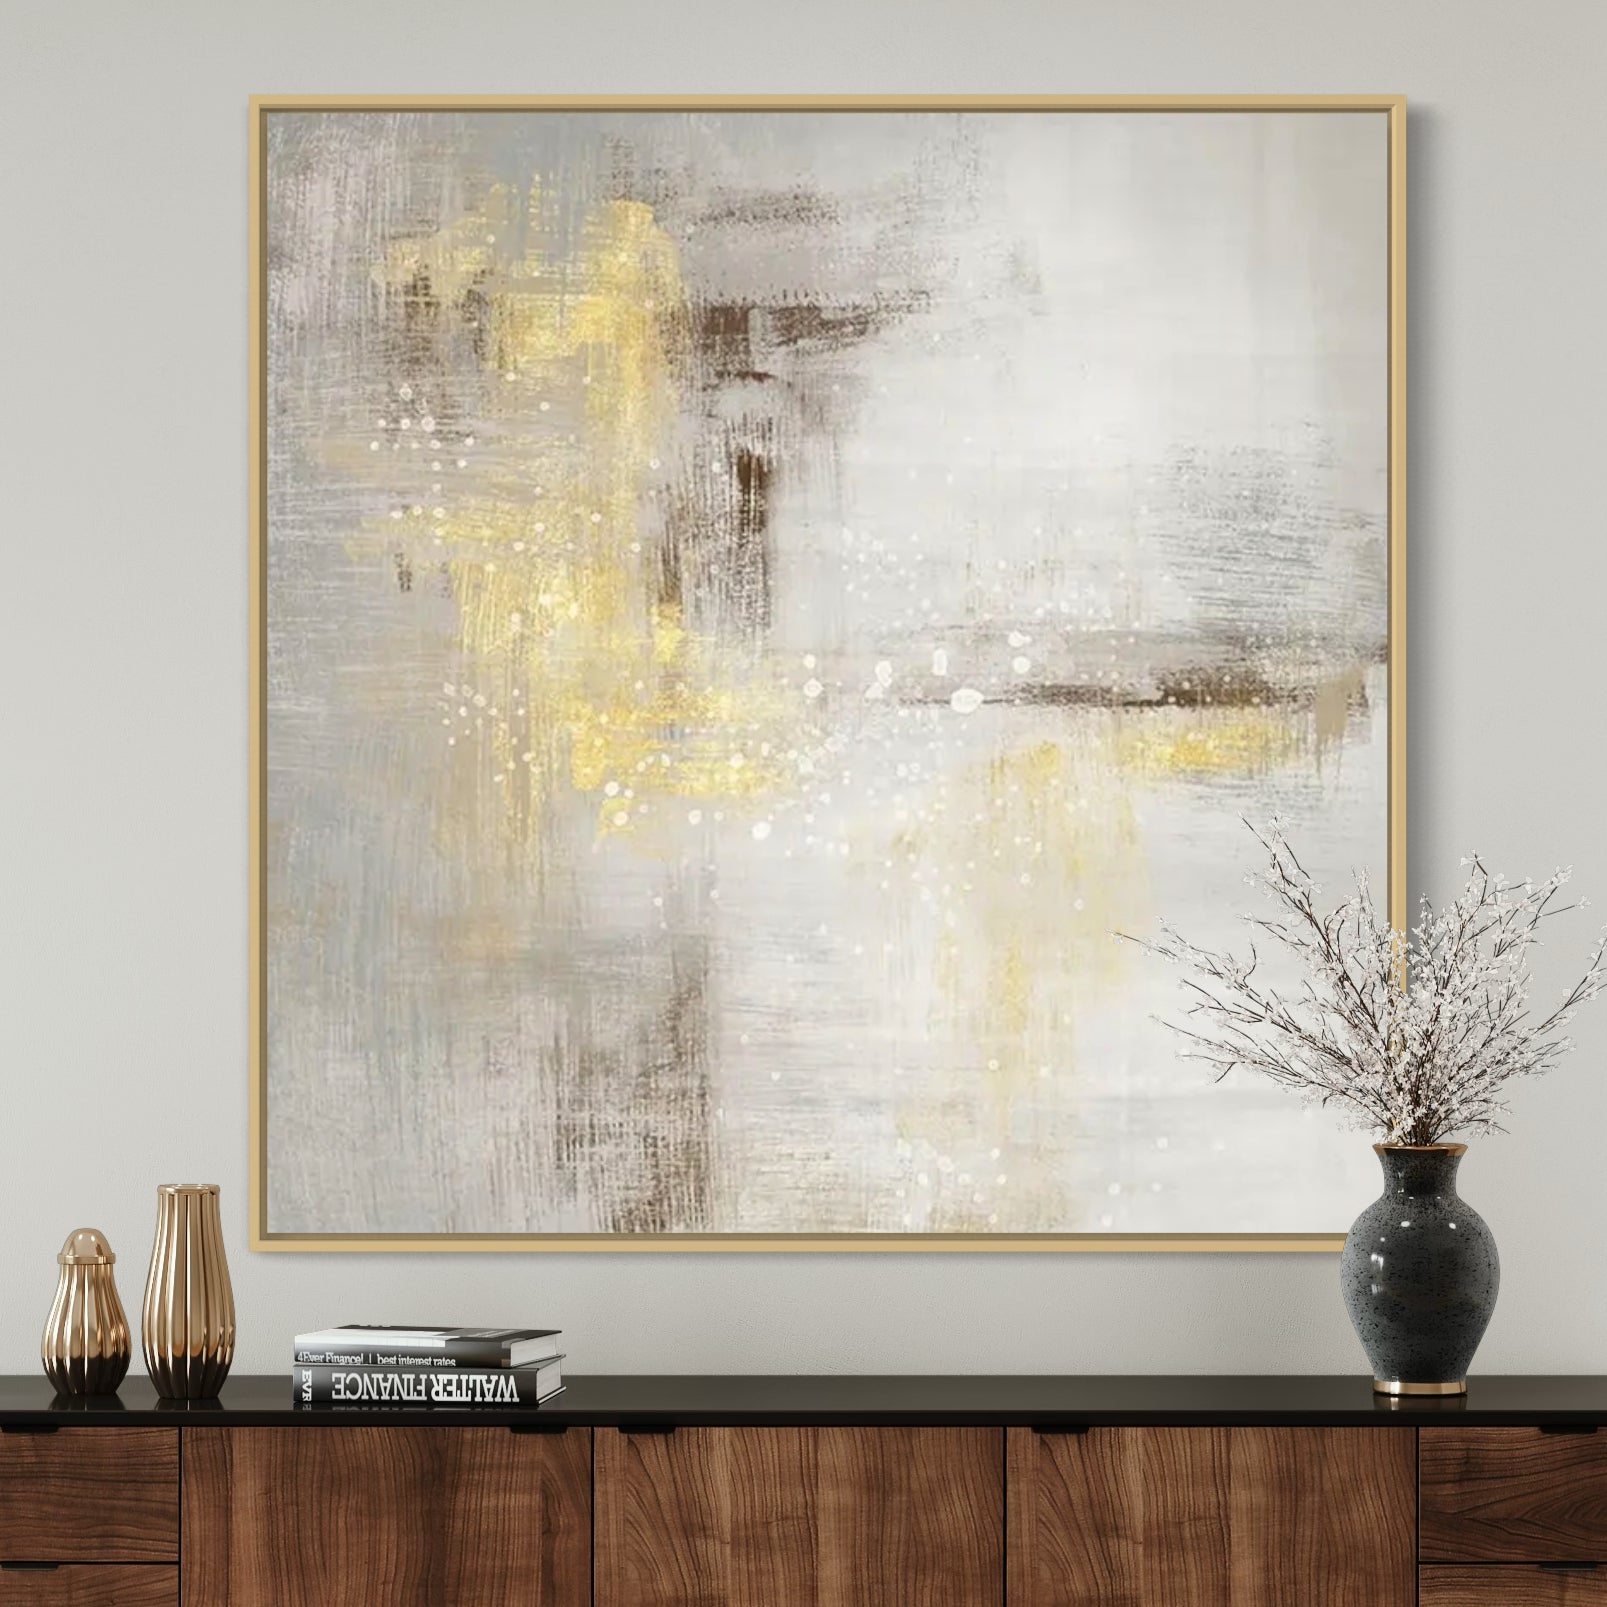 The World Of Light, Champagne / 100x100cm